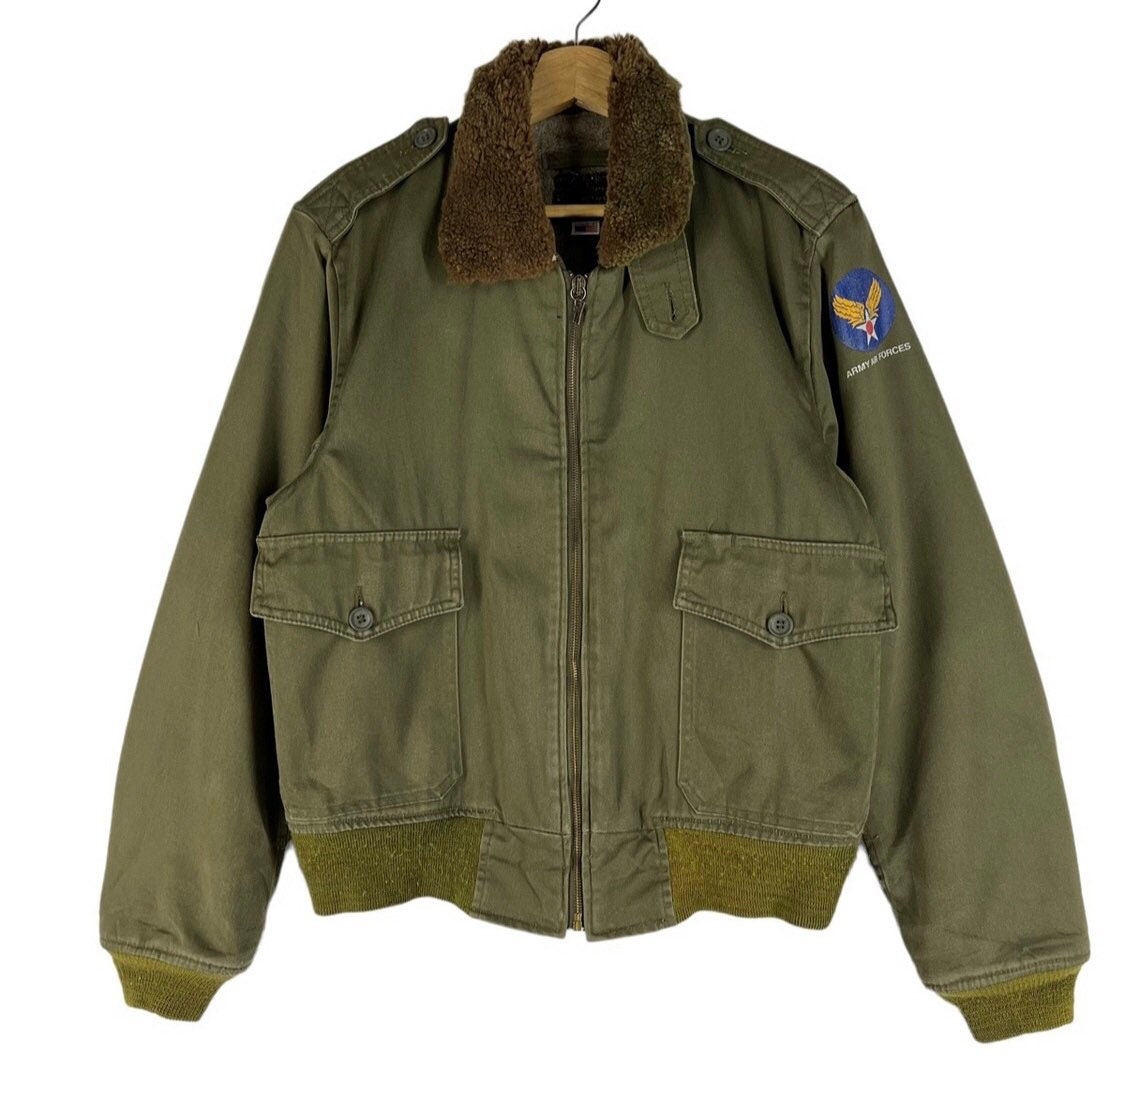 Vintage Us Air Force Type B-10 I. Spiewak&sons Bomber Jacket Made in ...